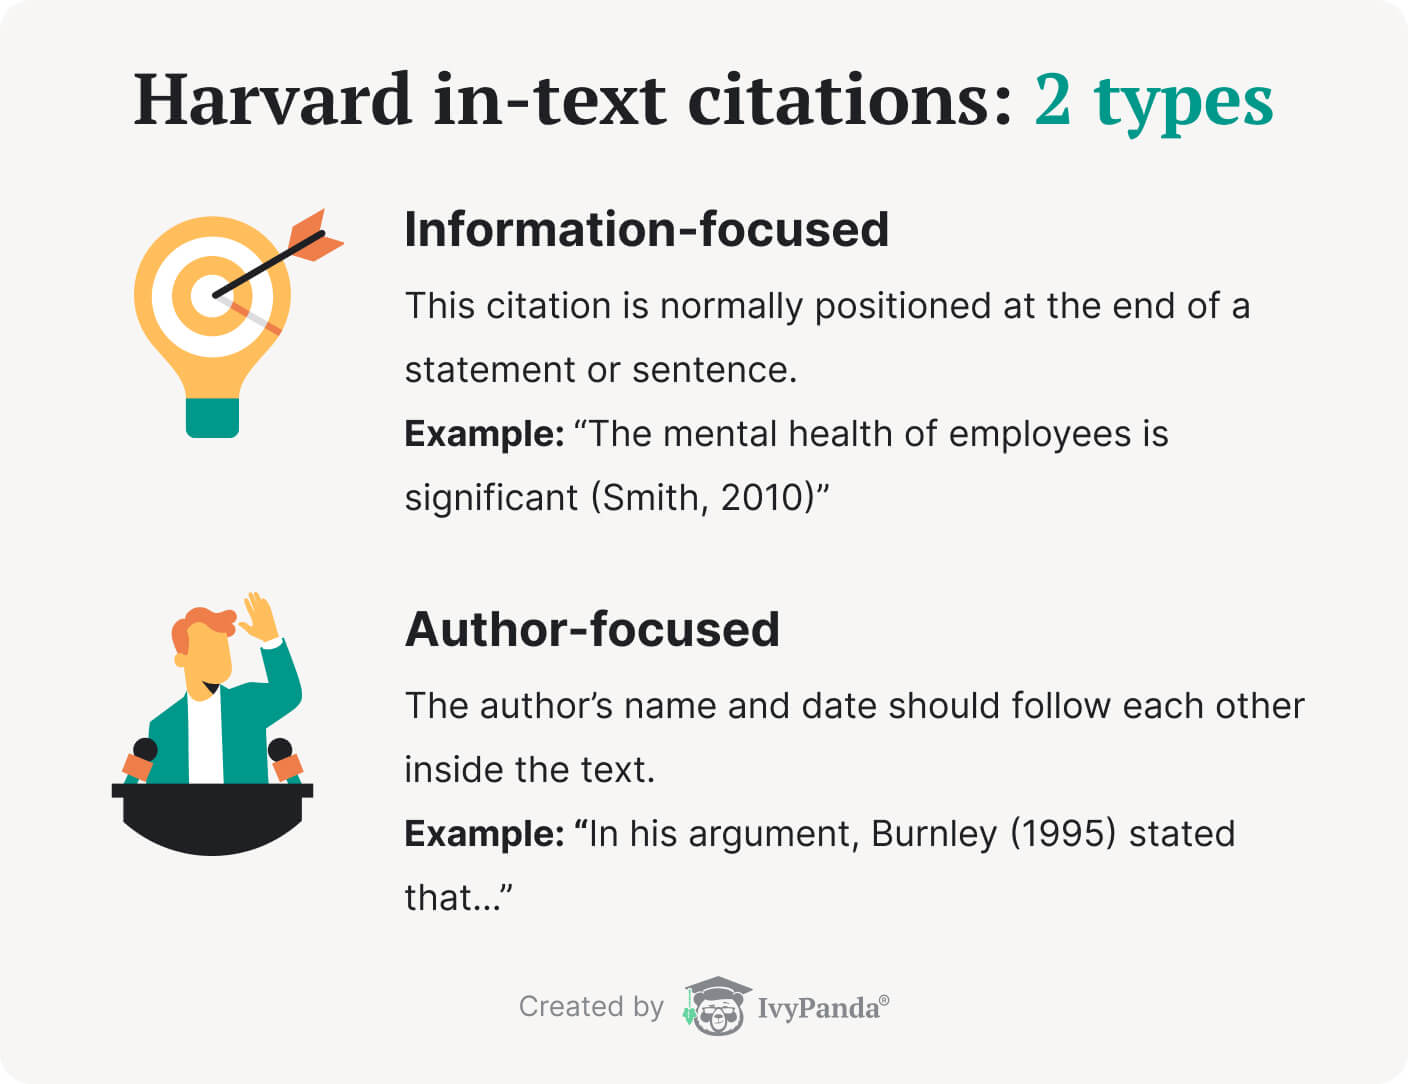 The picture lists the two types of Harvard in-text citations: information-based and author-based.